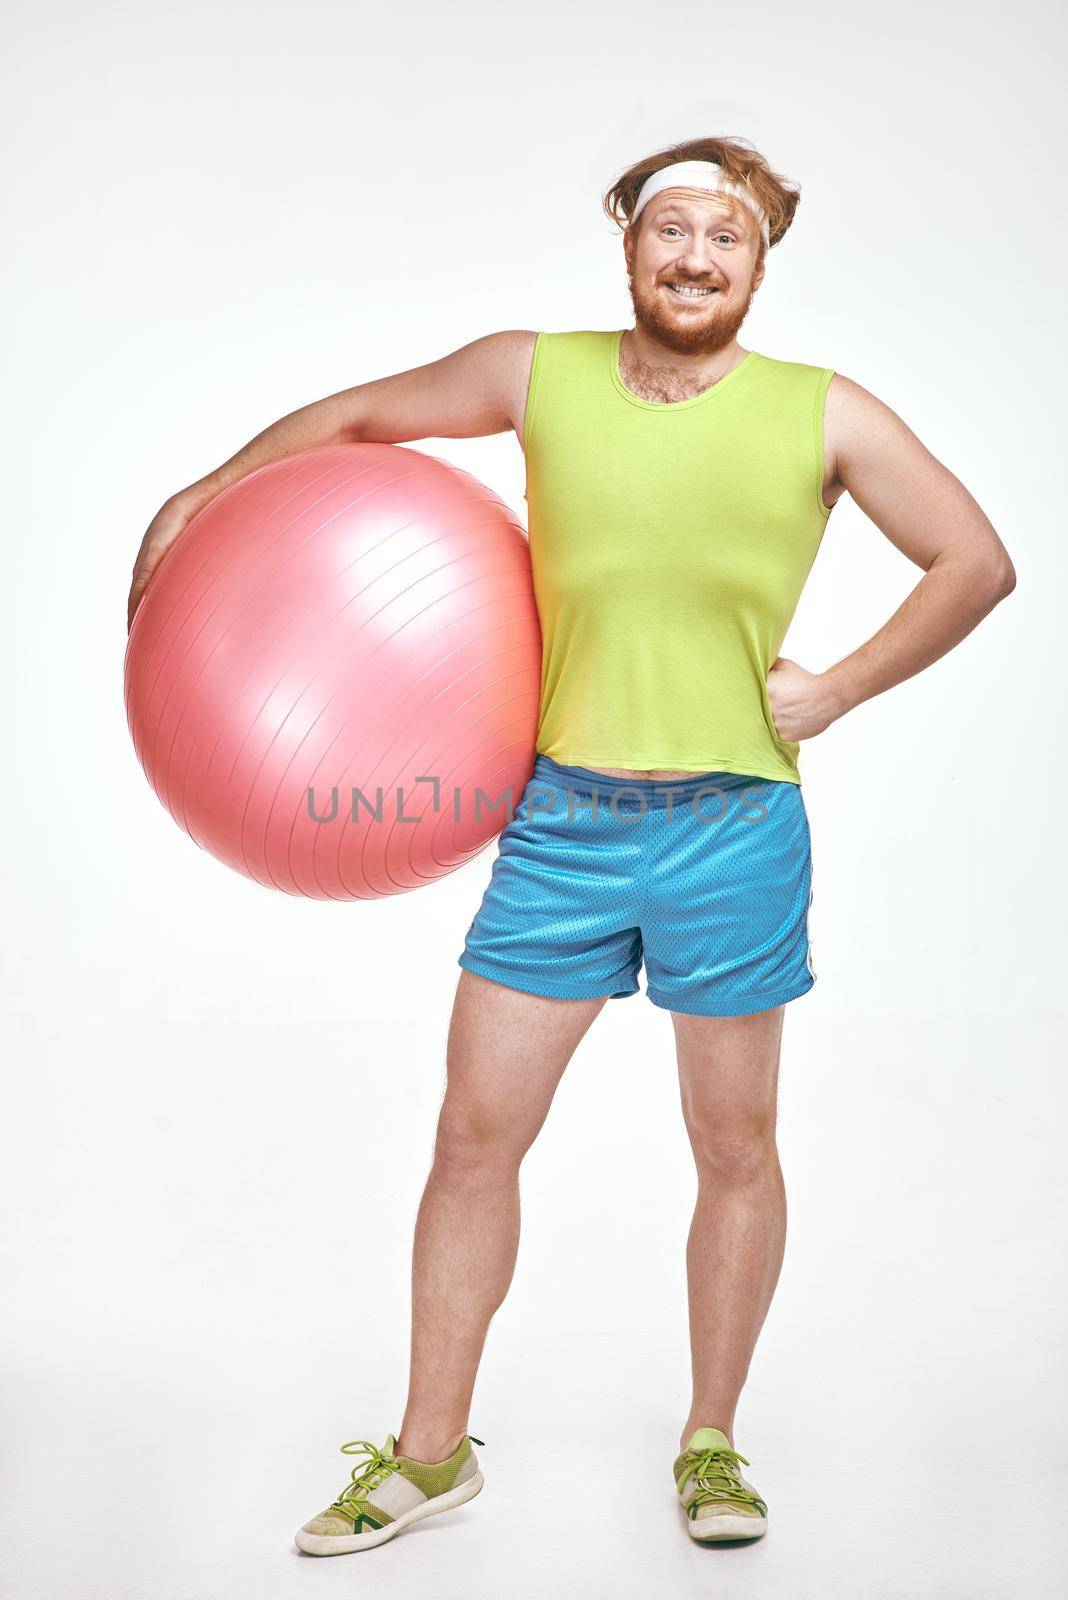 Funny picture of red haired, bearded, plump man on white background. Man wearing sportswear. Man holding fitness ball